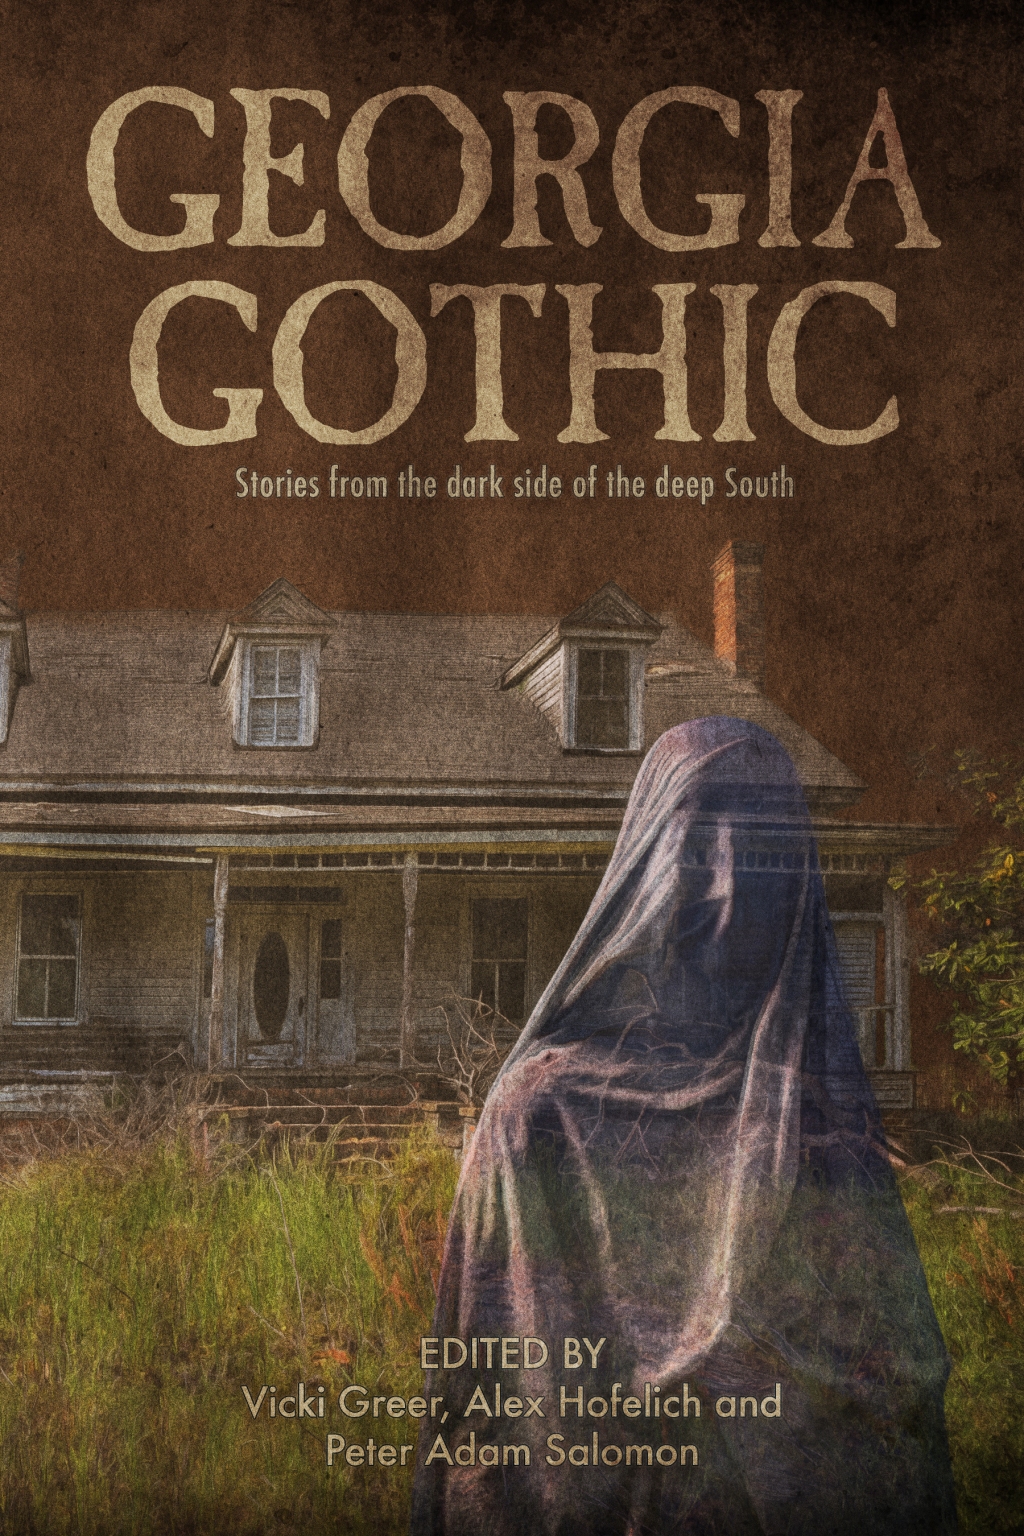 A Conversation with Co-Editor, Alex Hofelich, about putting together the Georgia Gothic Anthology, Stories from the Dark Side of the Deep South